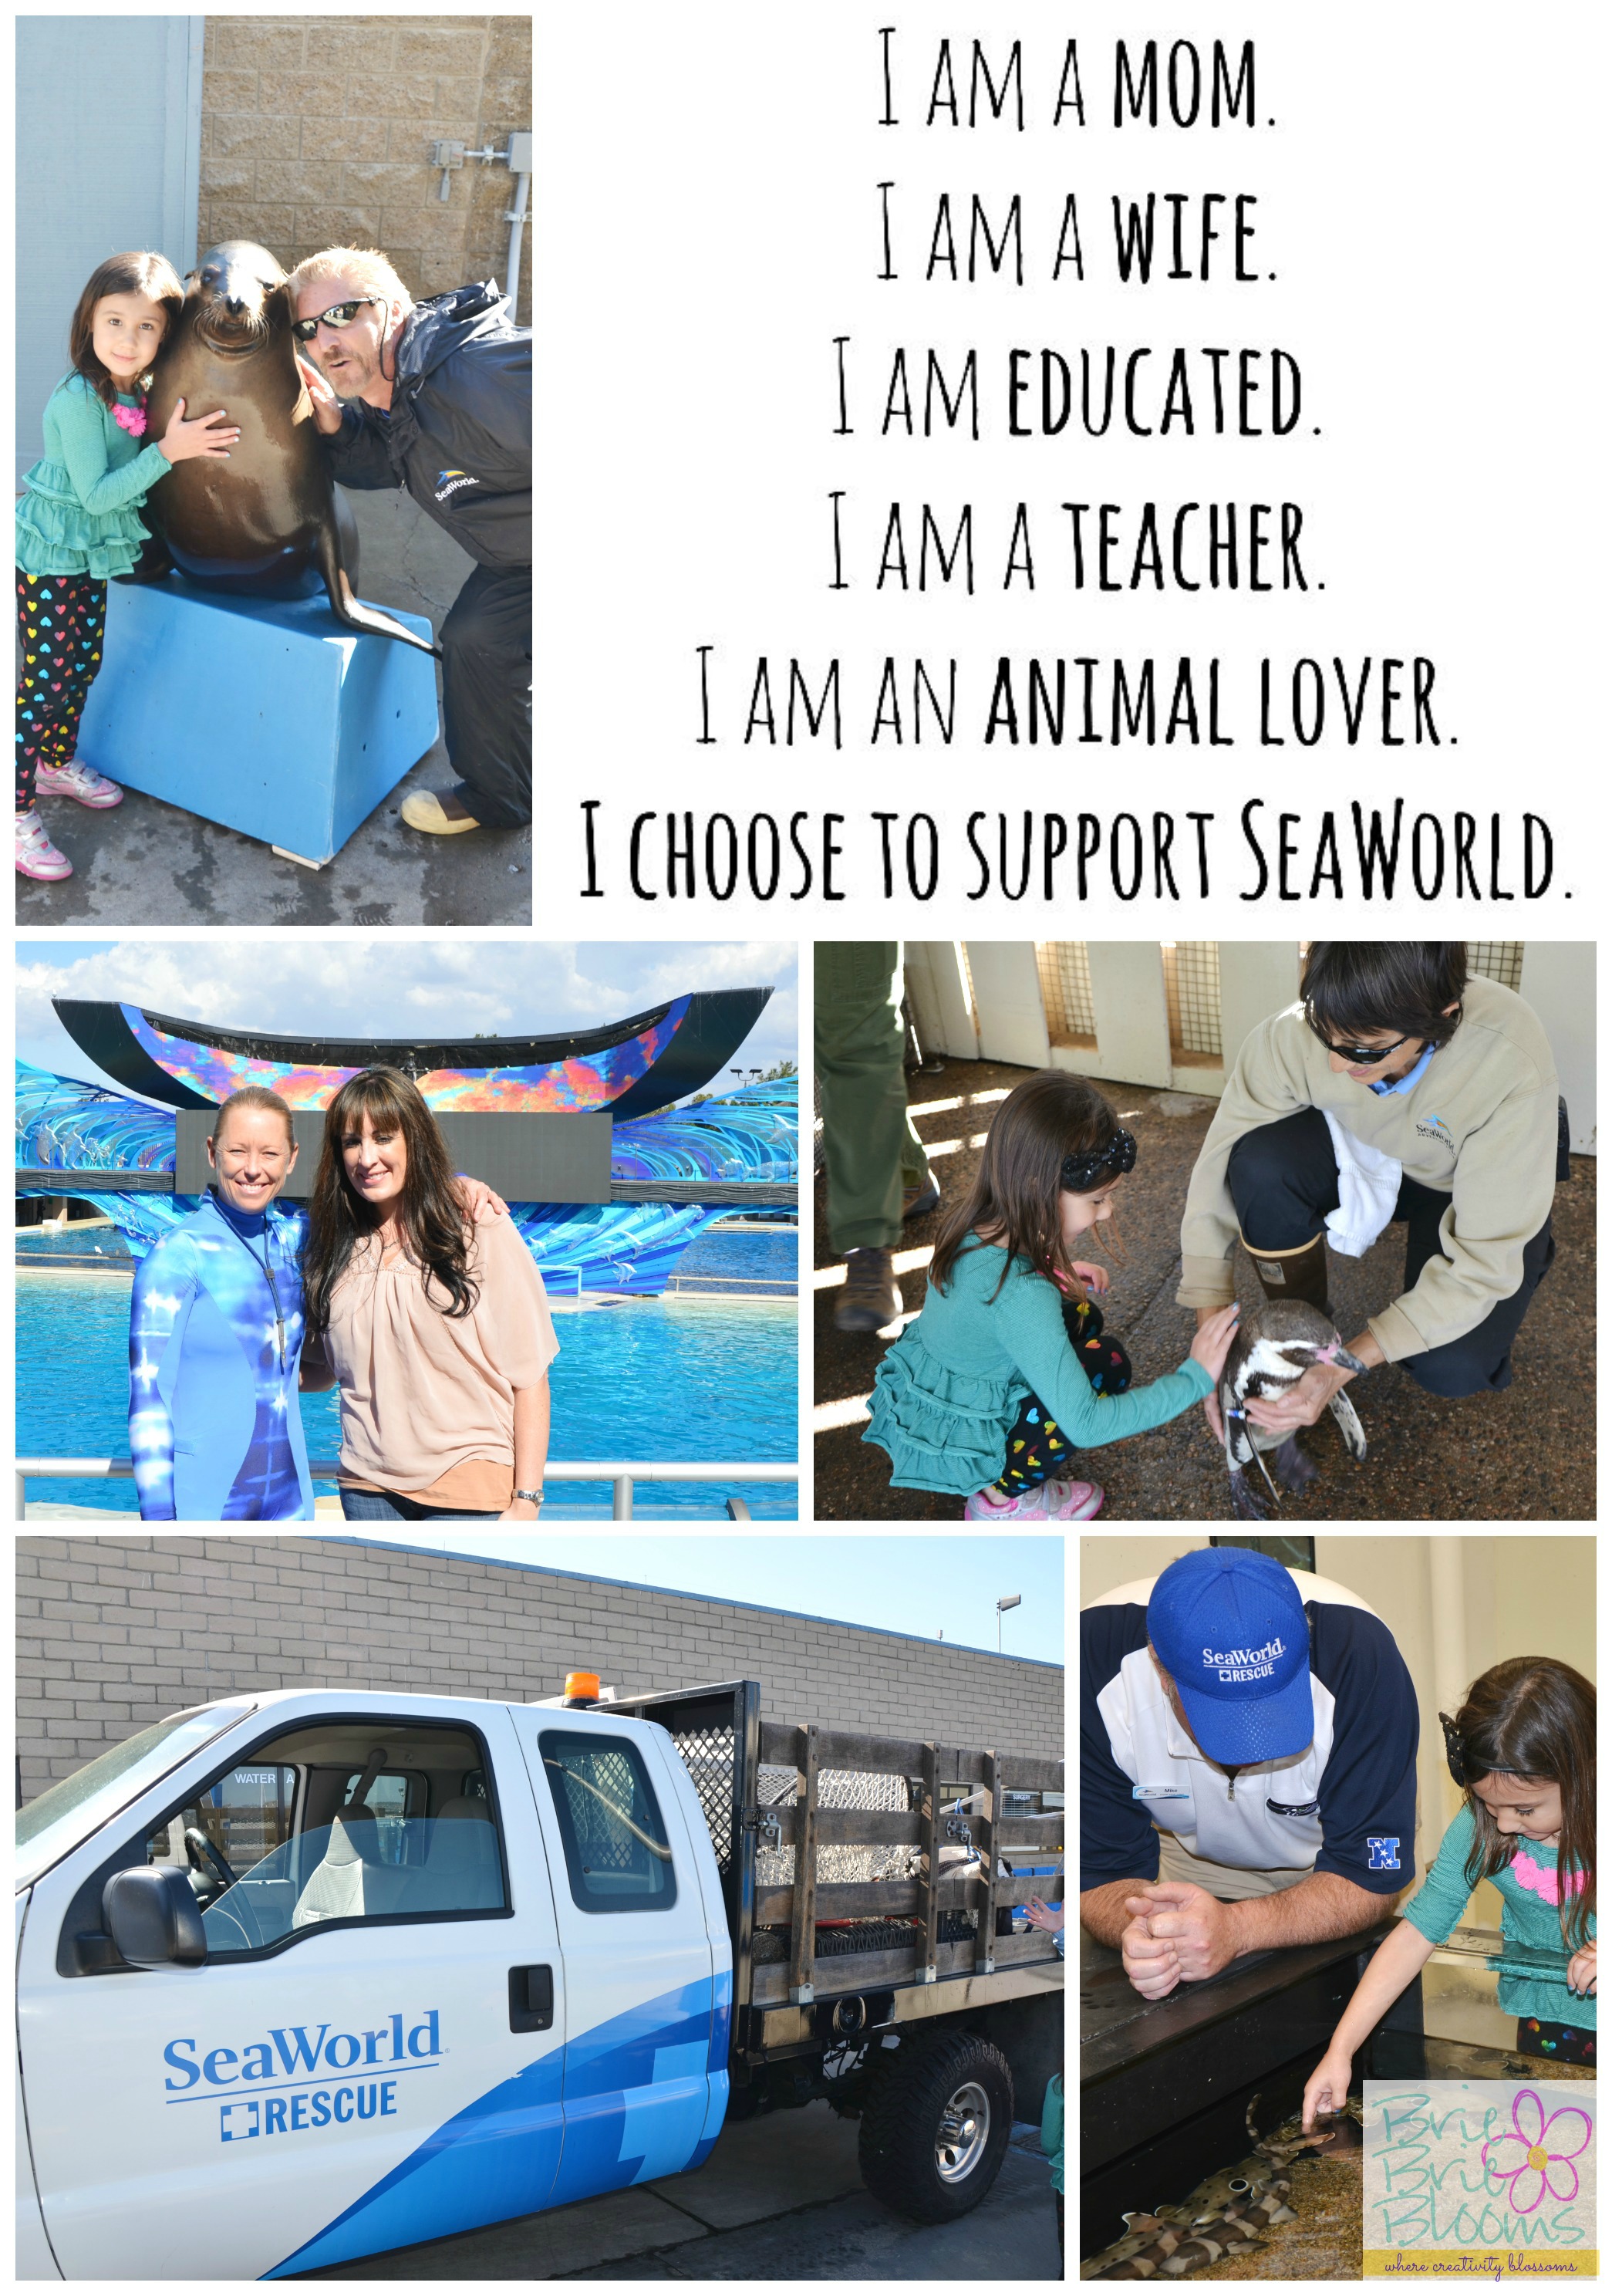 Let me tell you why I choose to support SeaWorld